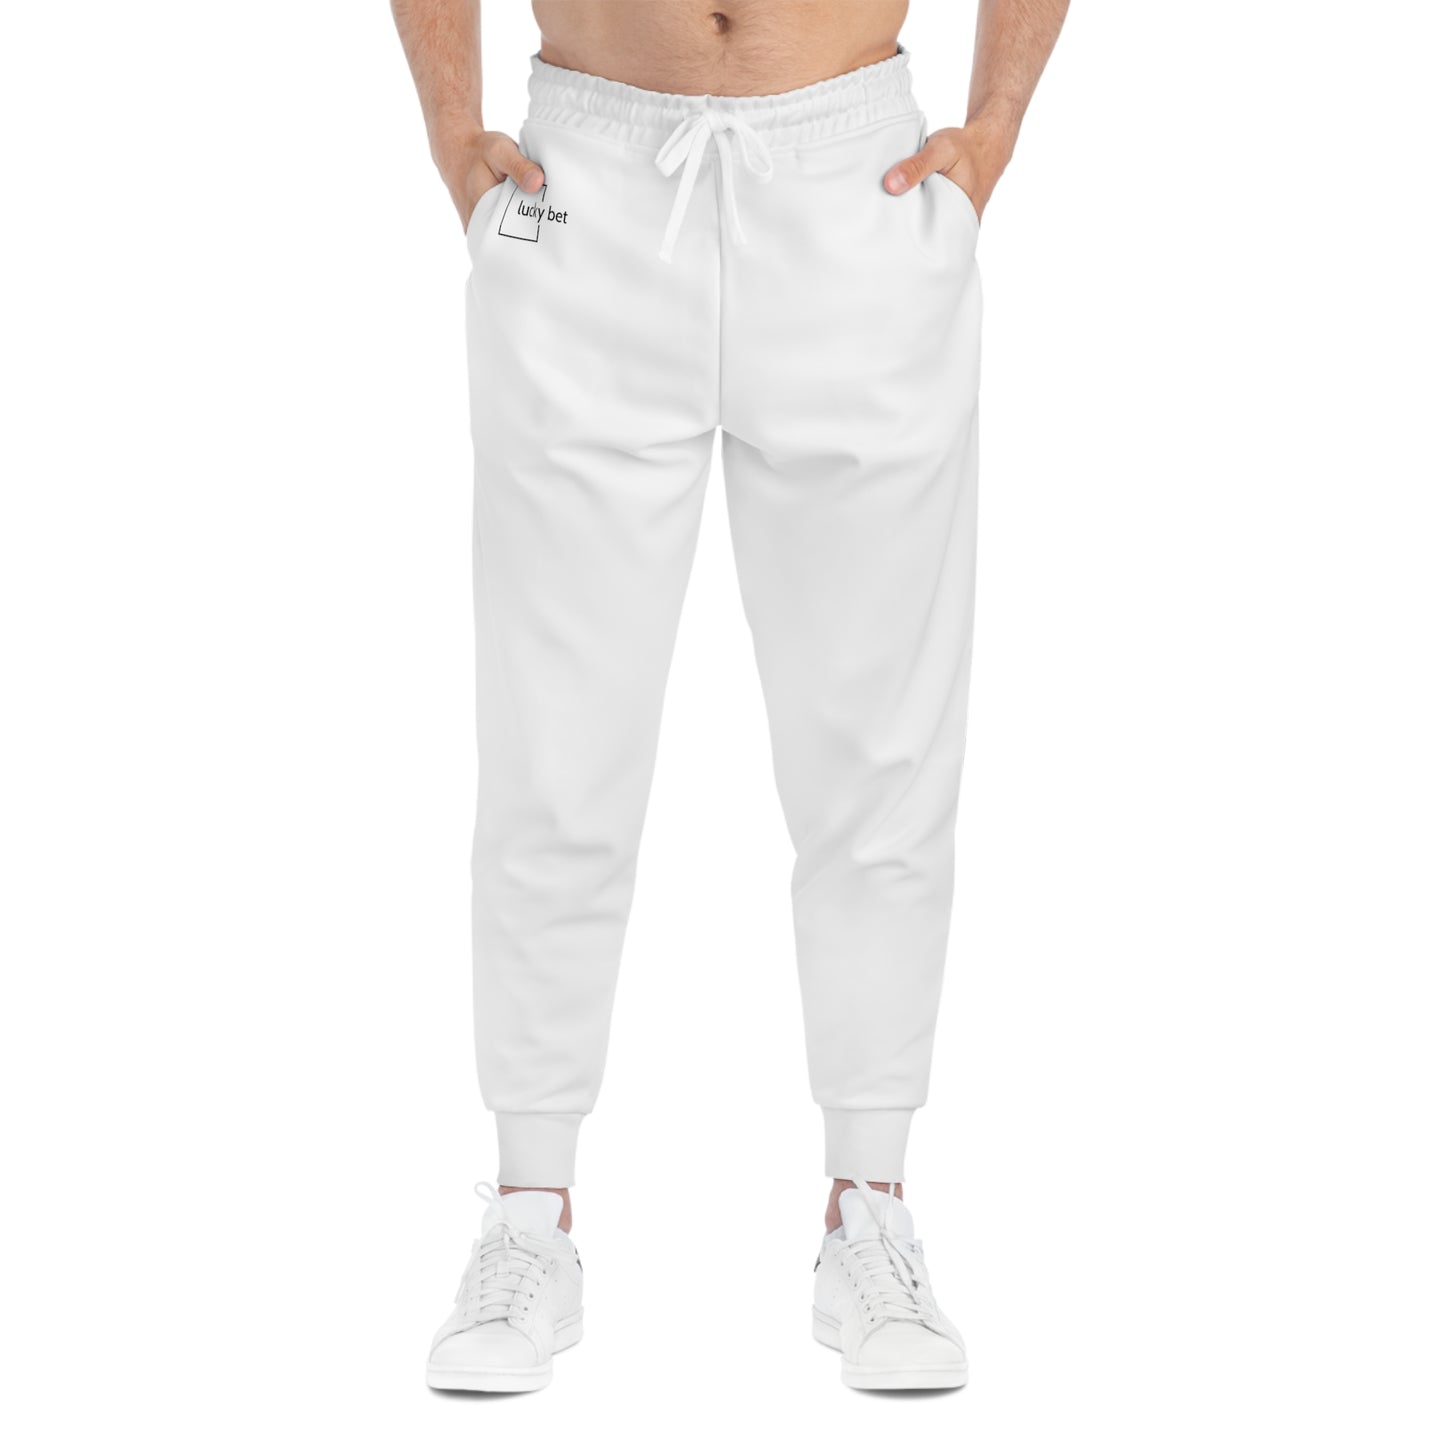 Lucky Bet's Athletic Jogger Pants